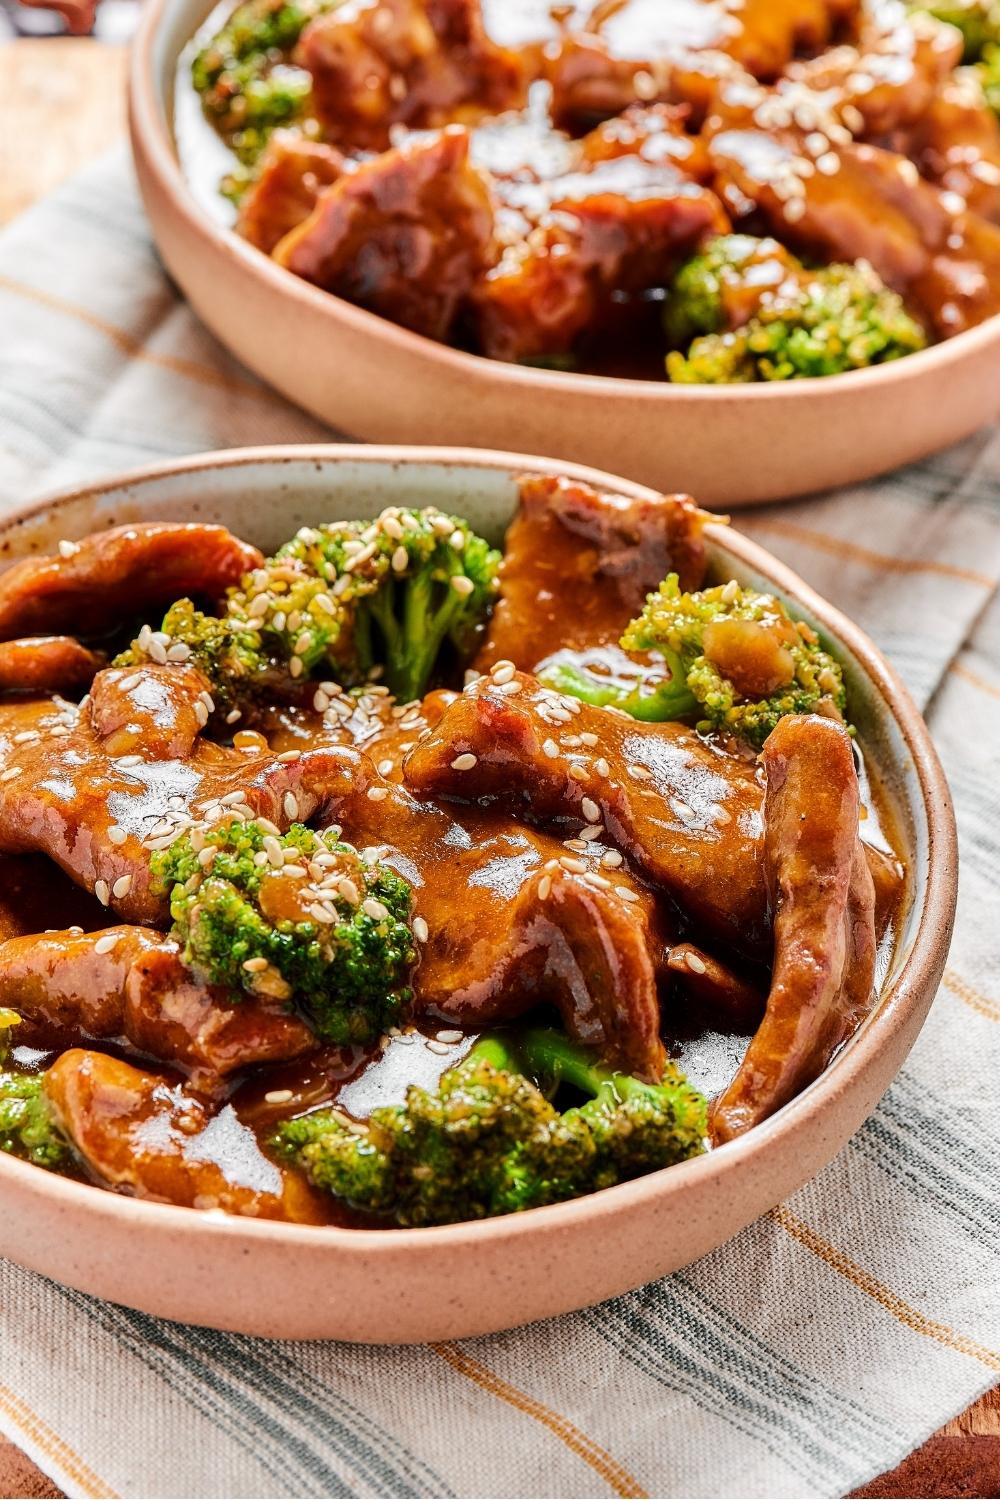 A bowl of beef and broccoli stir fry with another bowl of beef and broccoli stir fry behind it.